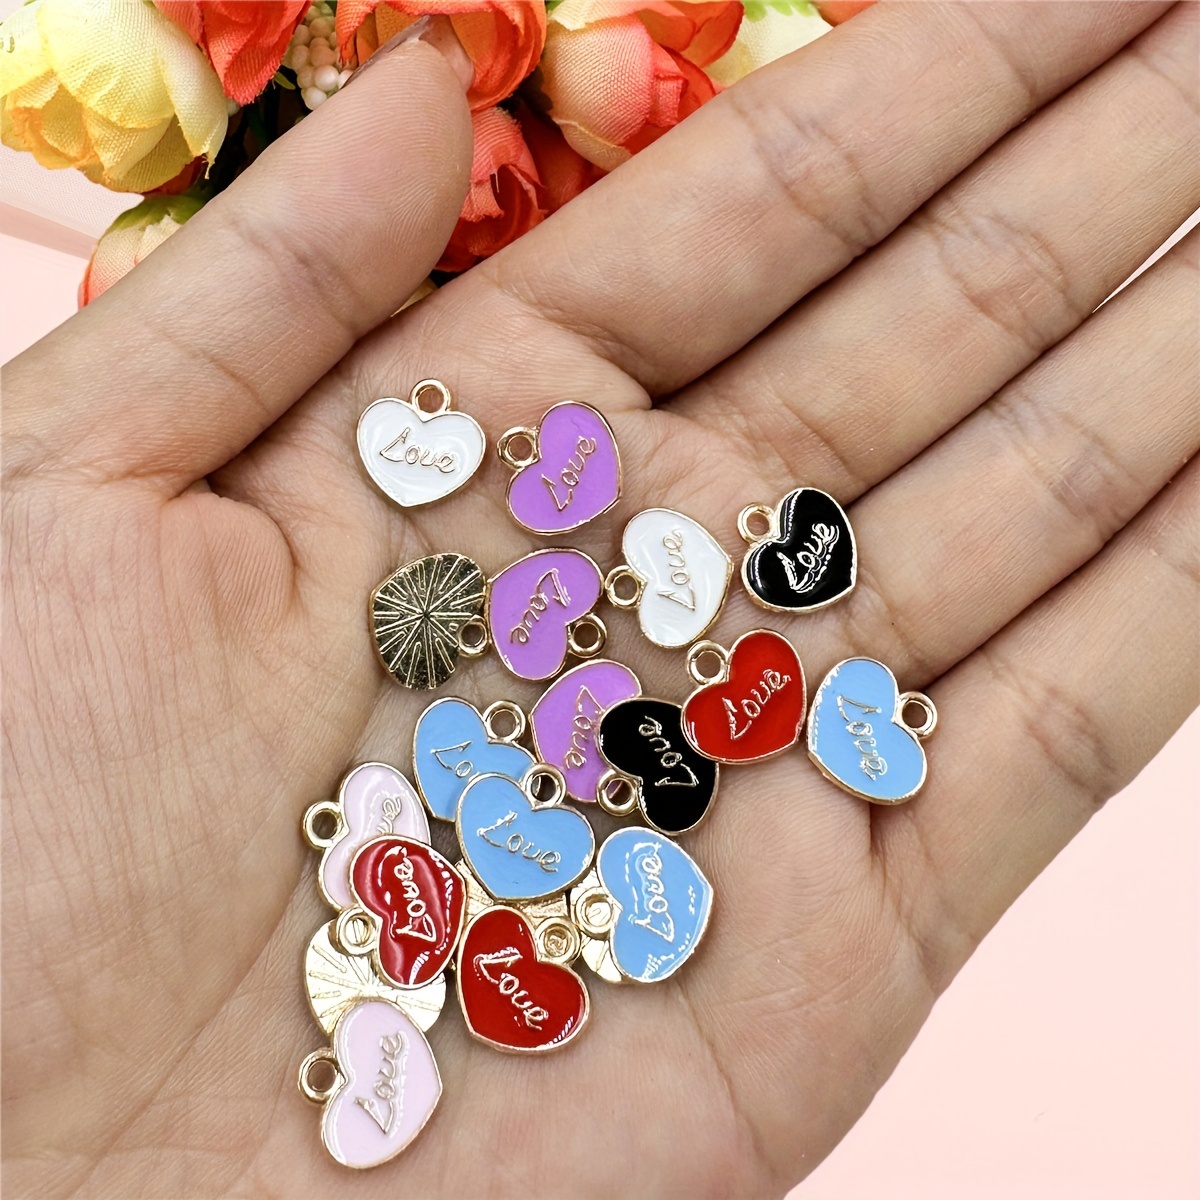 18pcs Valentine's Day Charms Enamel Rose Flower Charm Pendant Valentine Charms for Jewelry Making Charms DIY Earrings Necklace Brcaelets,one-size